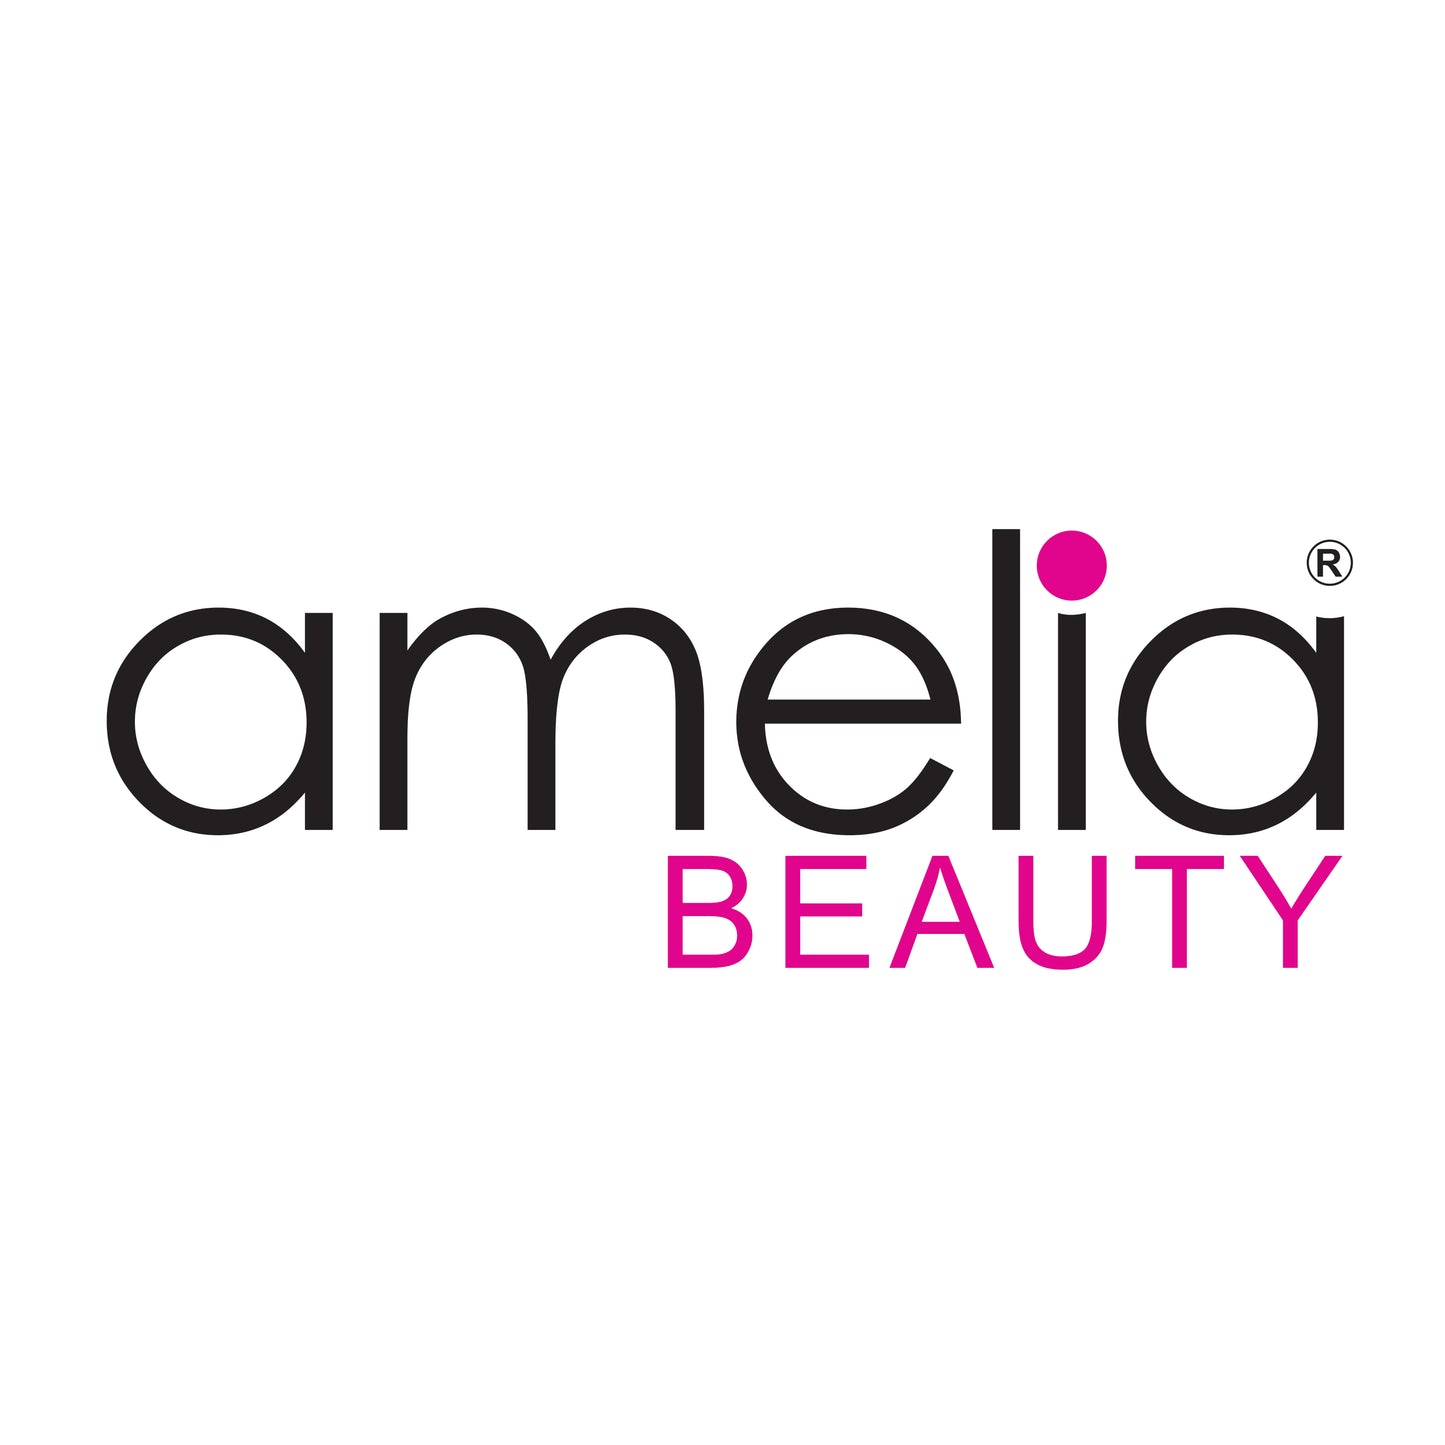 Amelia Beauty Products 8 Large Smooth Shiny Center Elastic Hair Coils, 2. 5in Diameter Thick Spiral Hair Ties, Gentle on Hair, Strong Hold and Minimizes Dents and Creases, Red